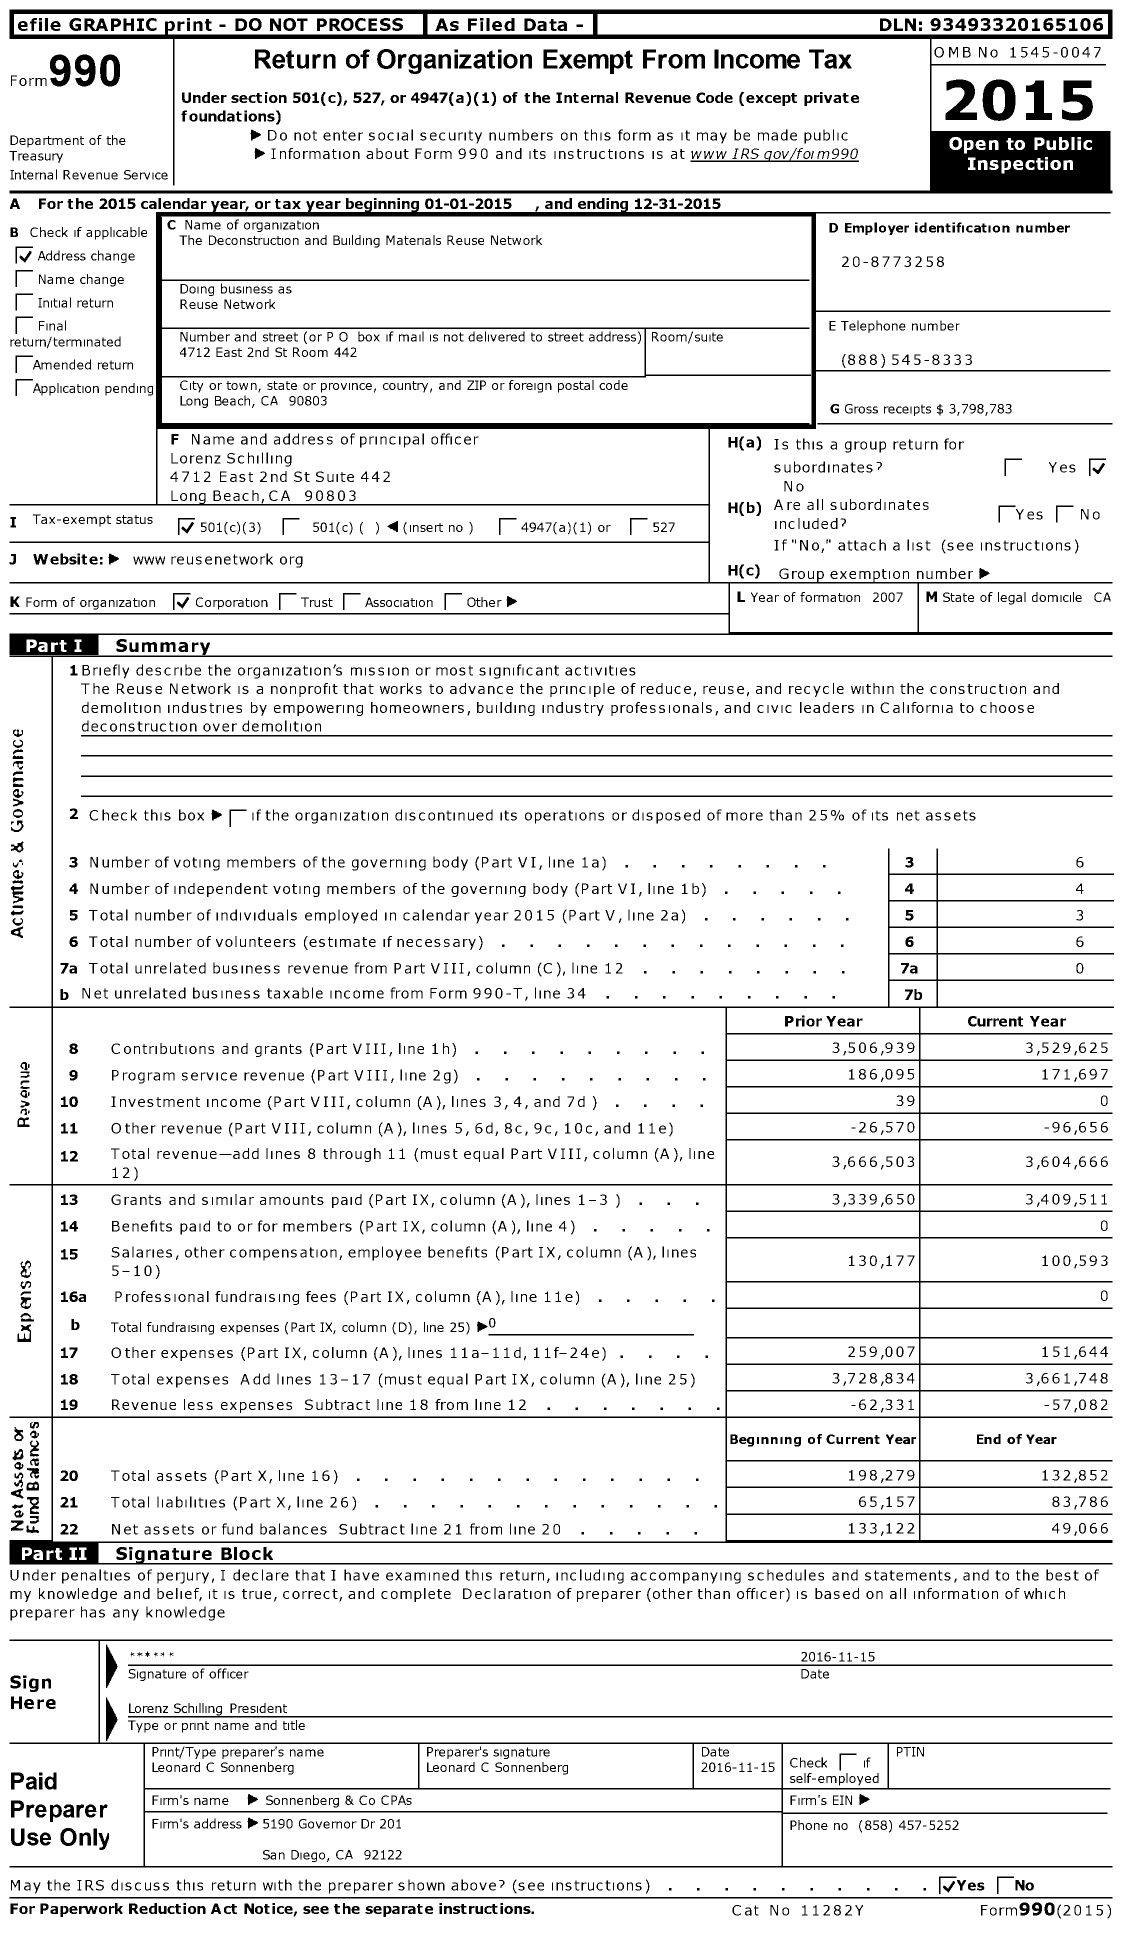 Image of first page of 2015 Form 990 for The Deconstruction and Building Materials Reuse Network (DRN)